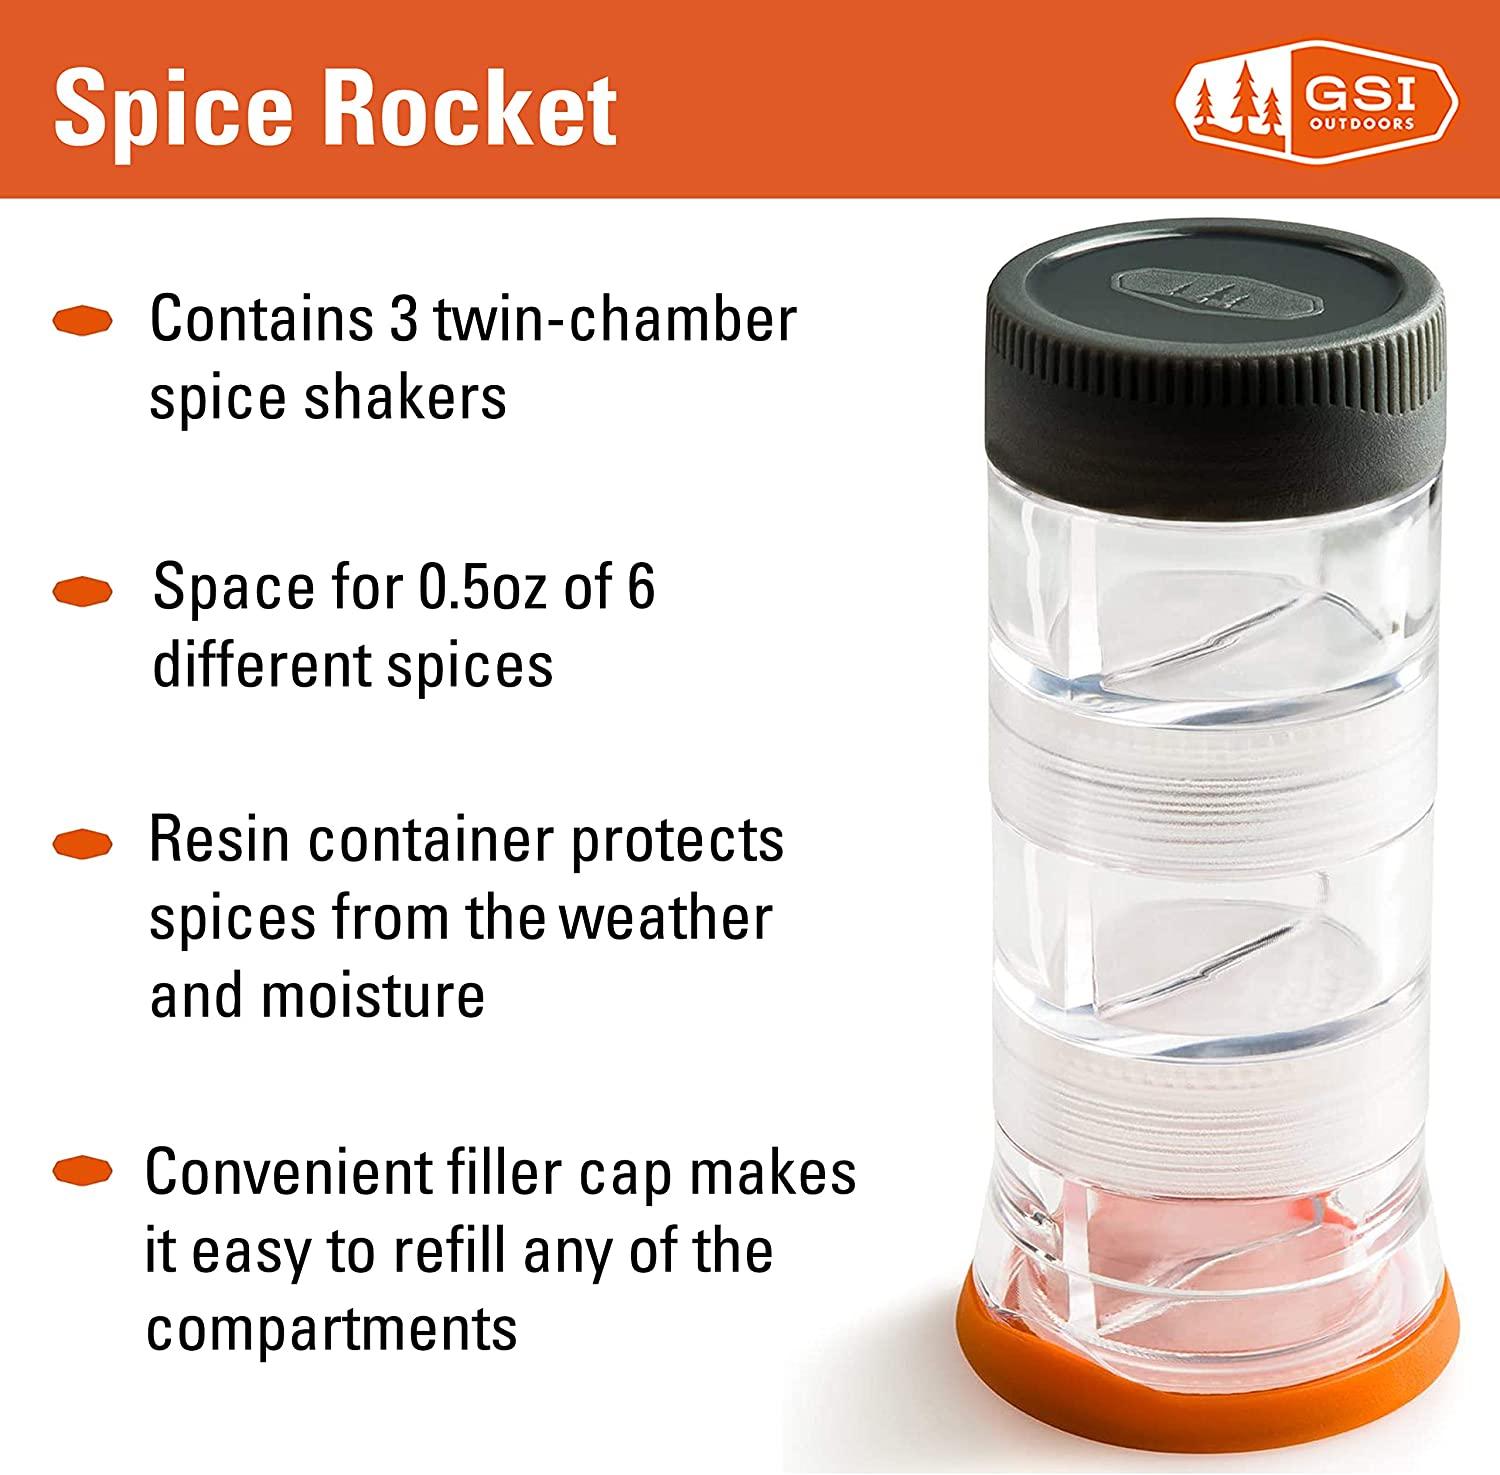 GSI spice rocket, spice missile and salt and pepper shaker.